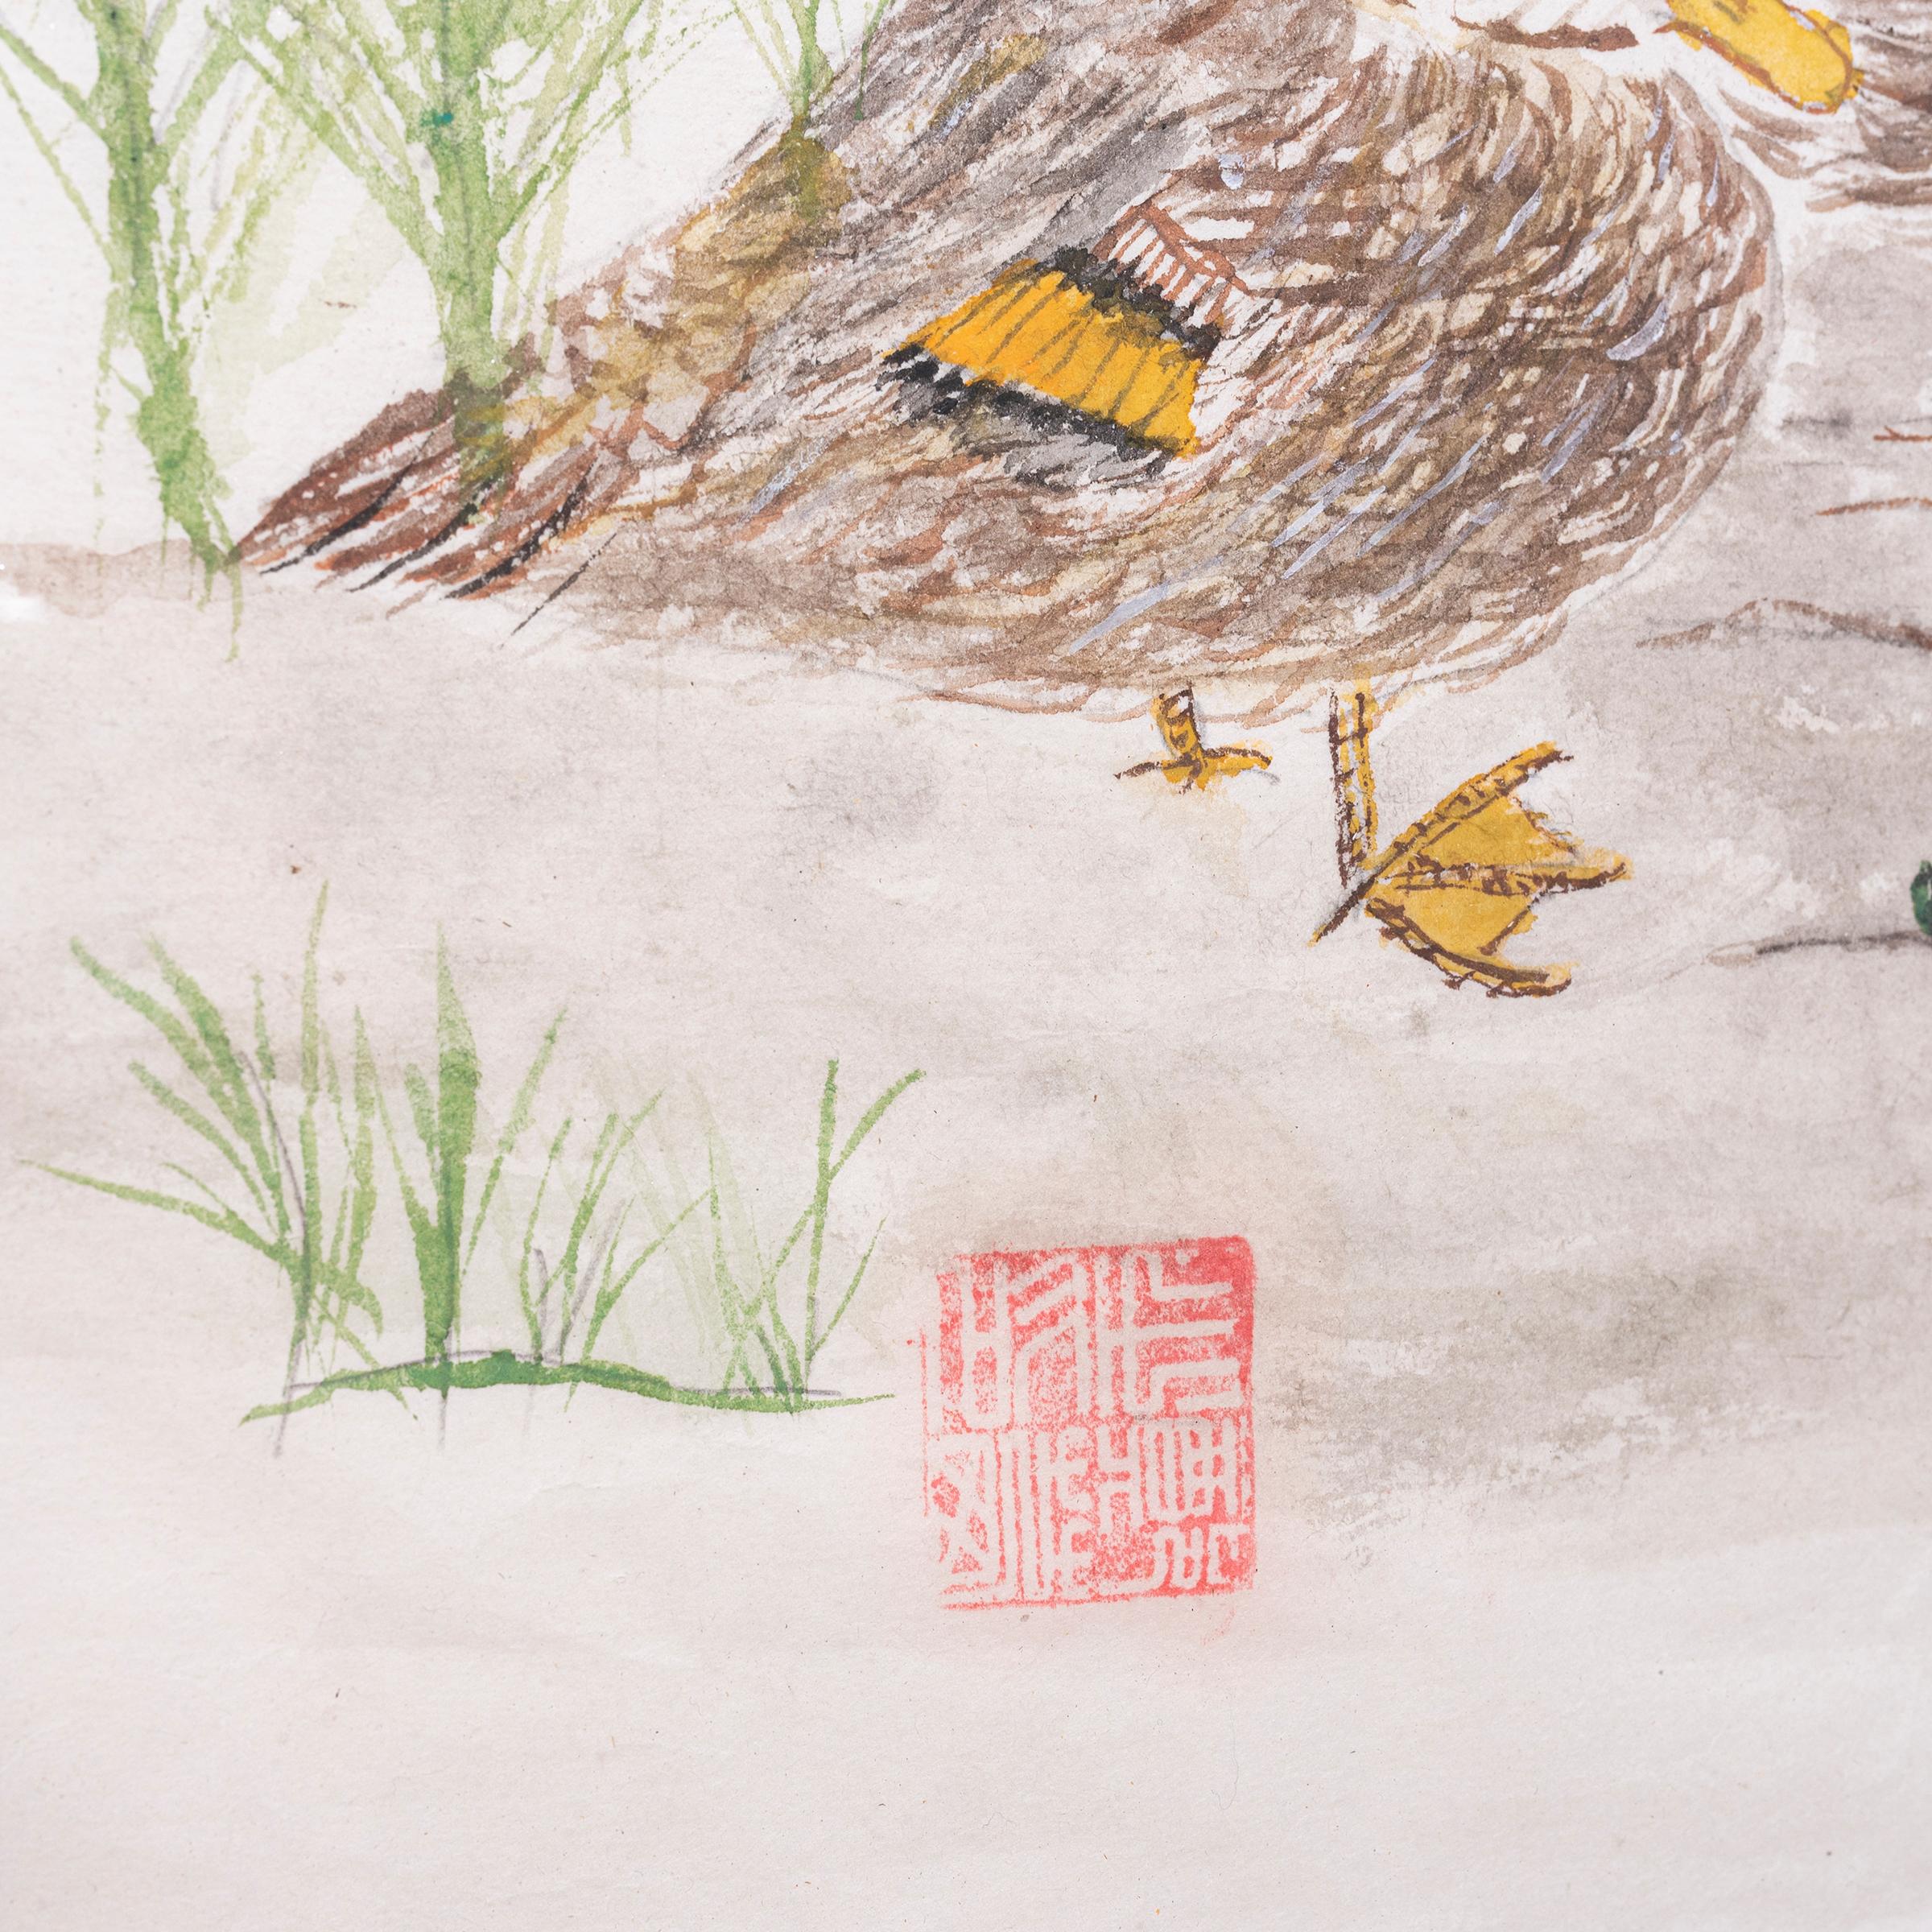 This charming watercolor is composed in the style of traditional ink calligraphy and depicts two ducks resting on a river bank. Tall grass and leafy sprouts dot the rocky terrain and calm waters lap against the shore. The small painting is set